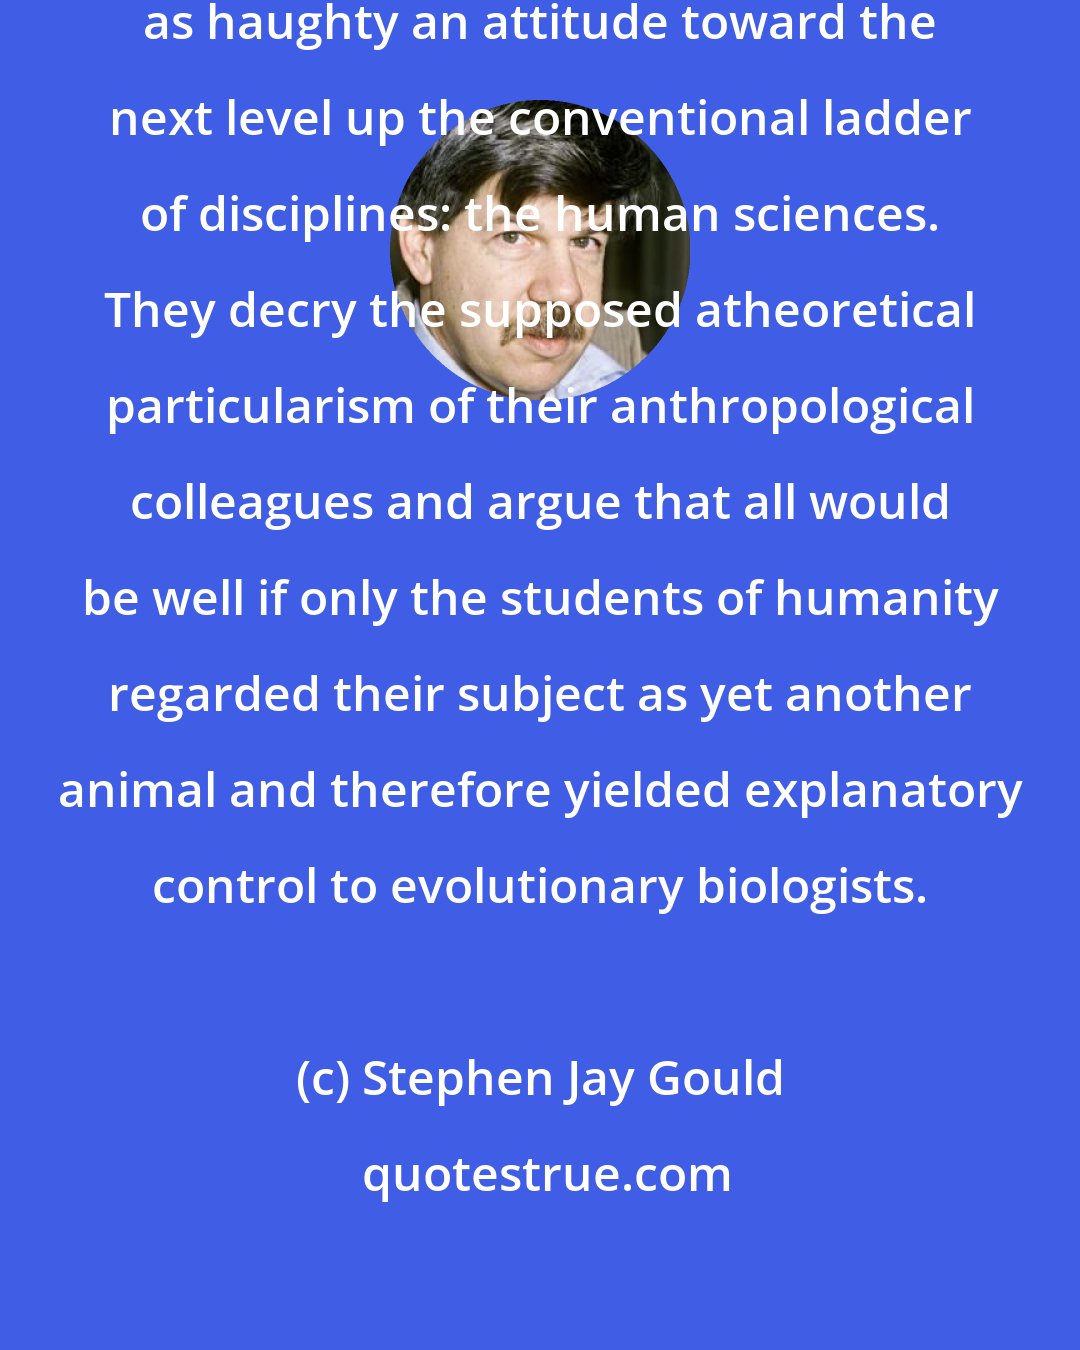 Stephen Jay Gould: [E]volutionists sometimes take as haughty an attitude toward the next level up the conventional ladder of disciplines: the human sciences. They decry the supposed atheoretical particularism of their anthropological colleagues and argue that all would be well if only the students of humanity regarded their subject as yet another animal and therefore yielded explanatory control to evolutionary biologists.